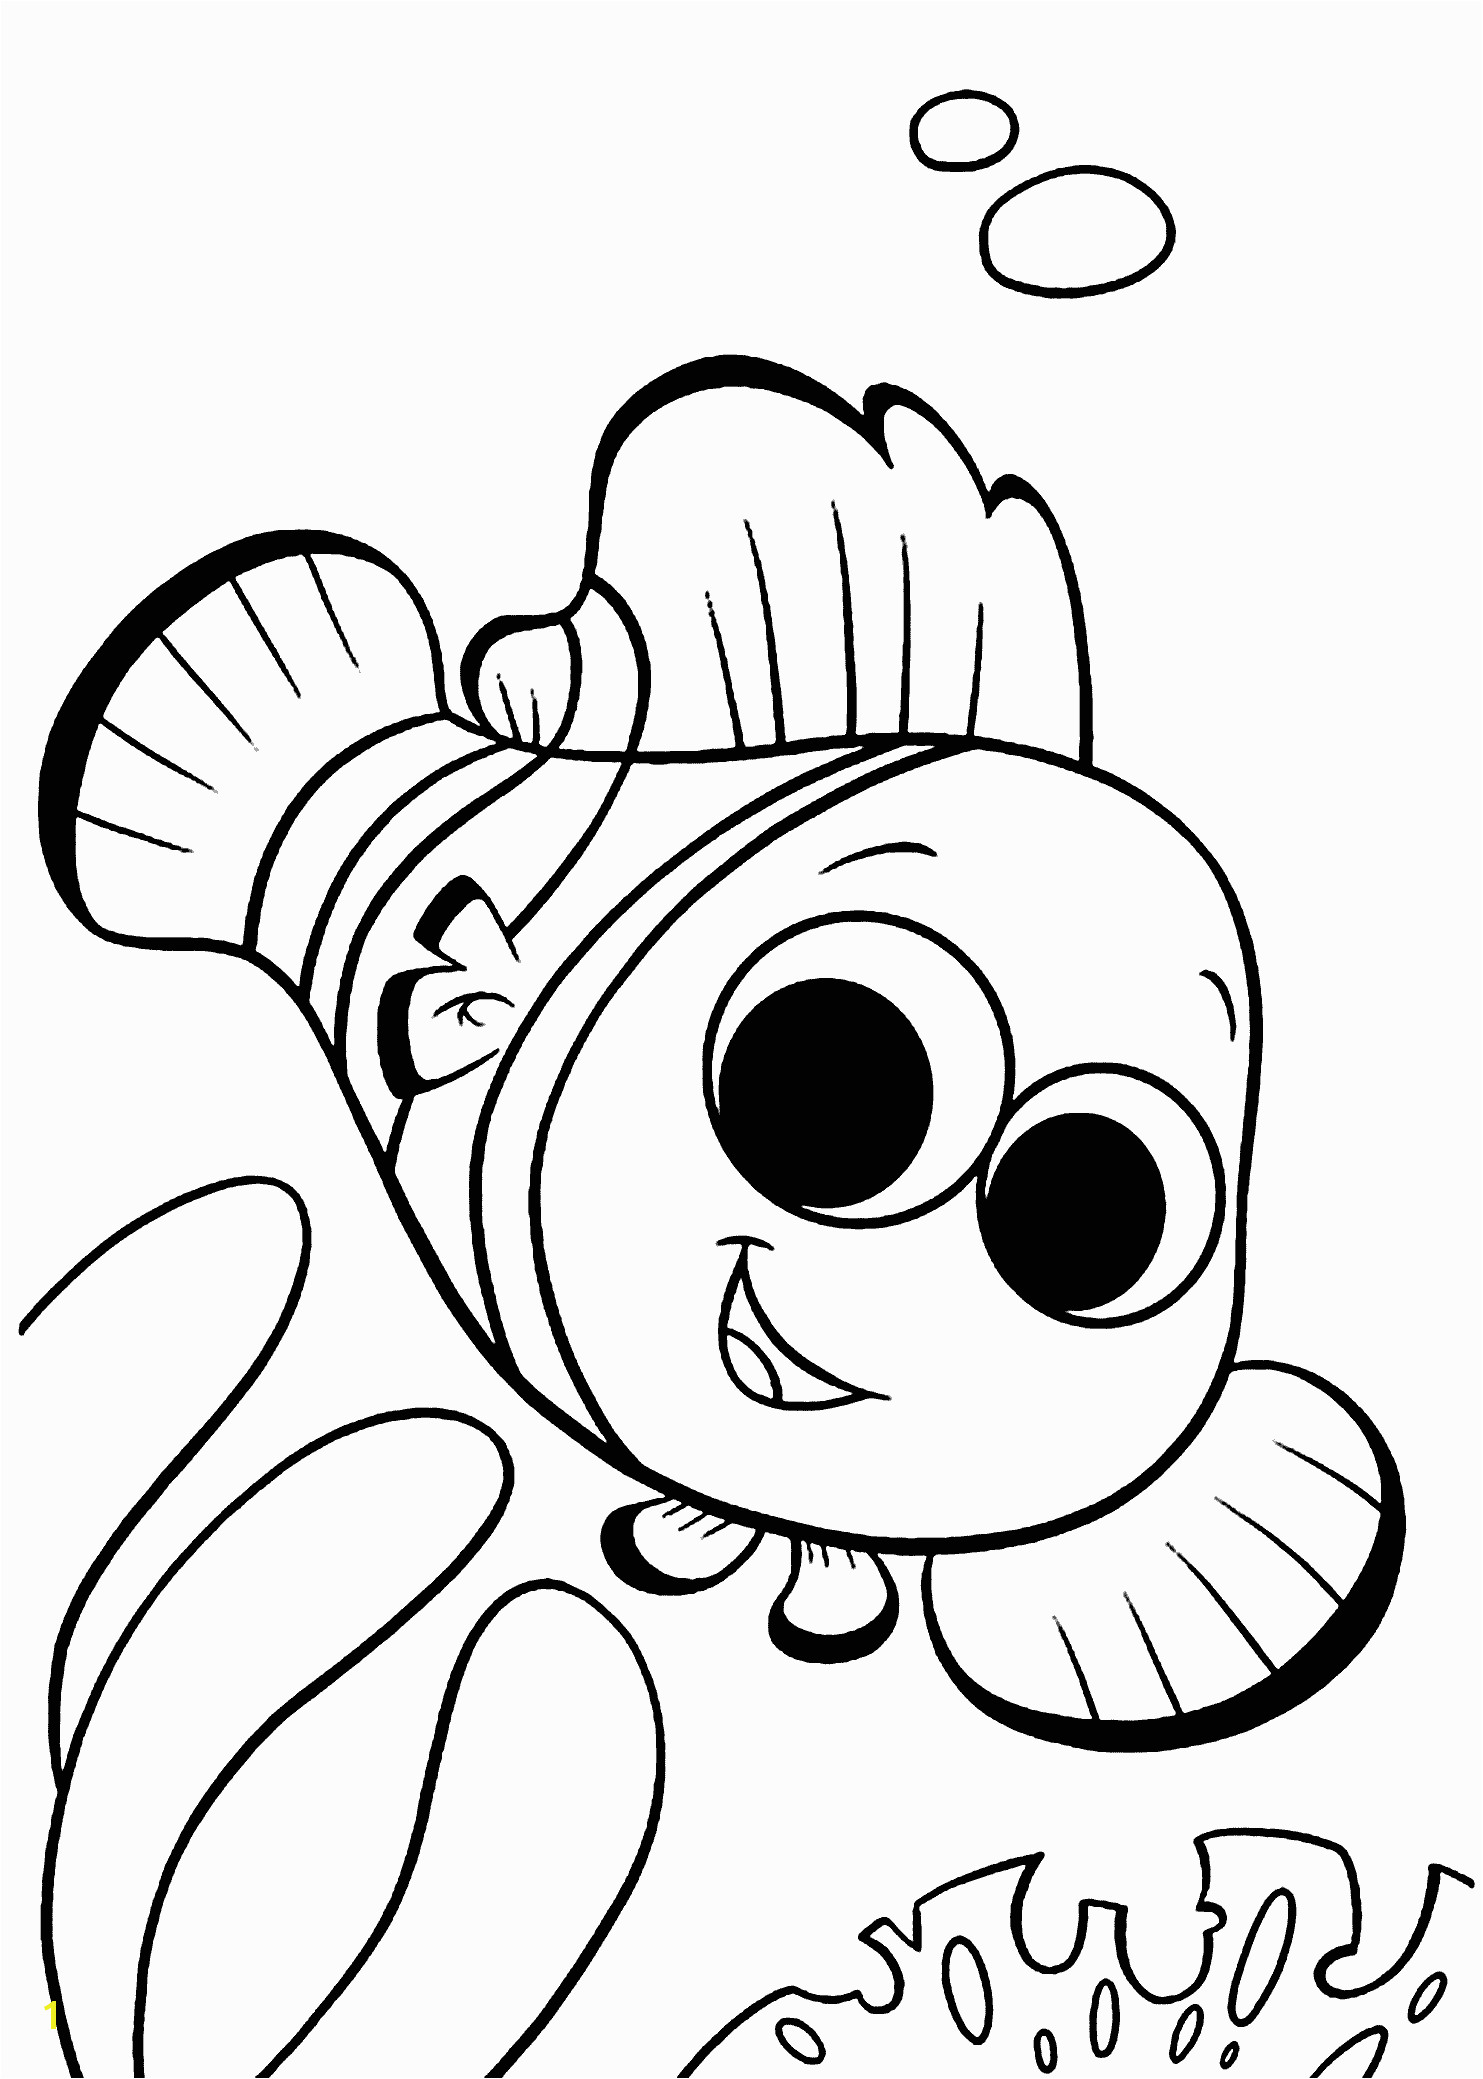 finding nemo coloring pages for kids printable free coloringfinding nemo coloring pages for kids